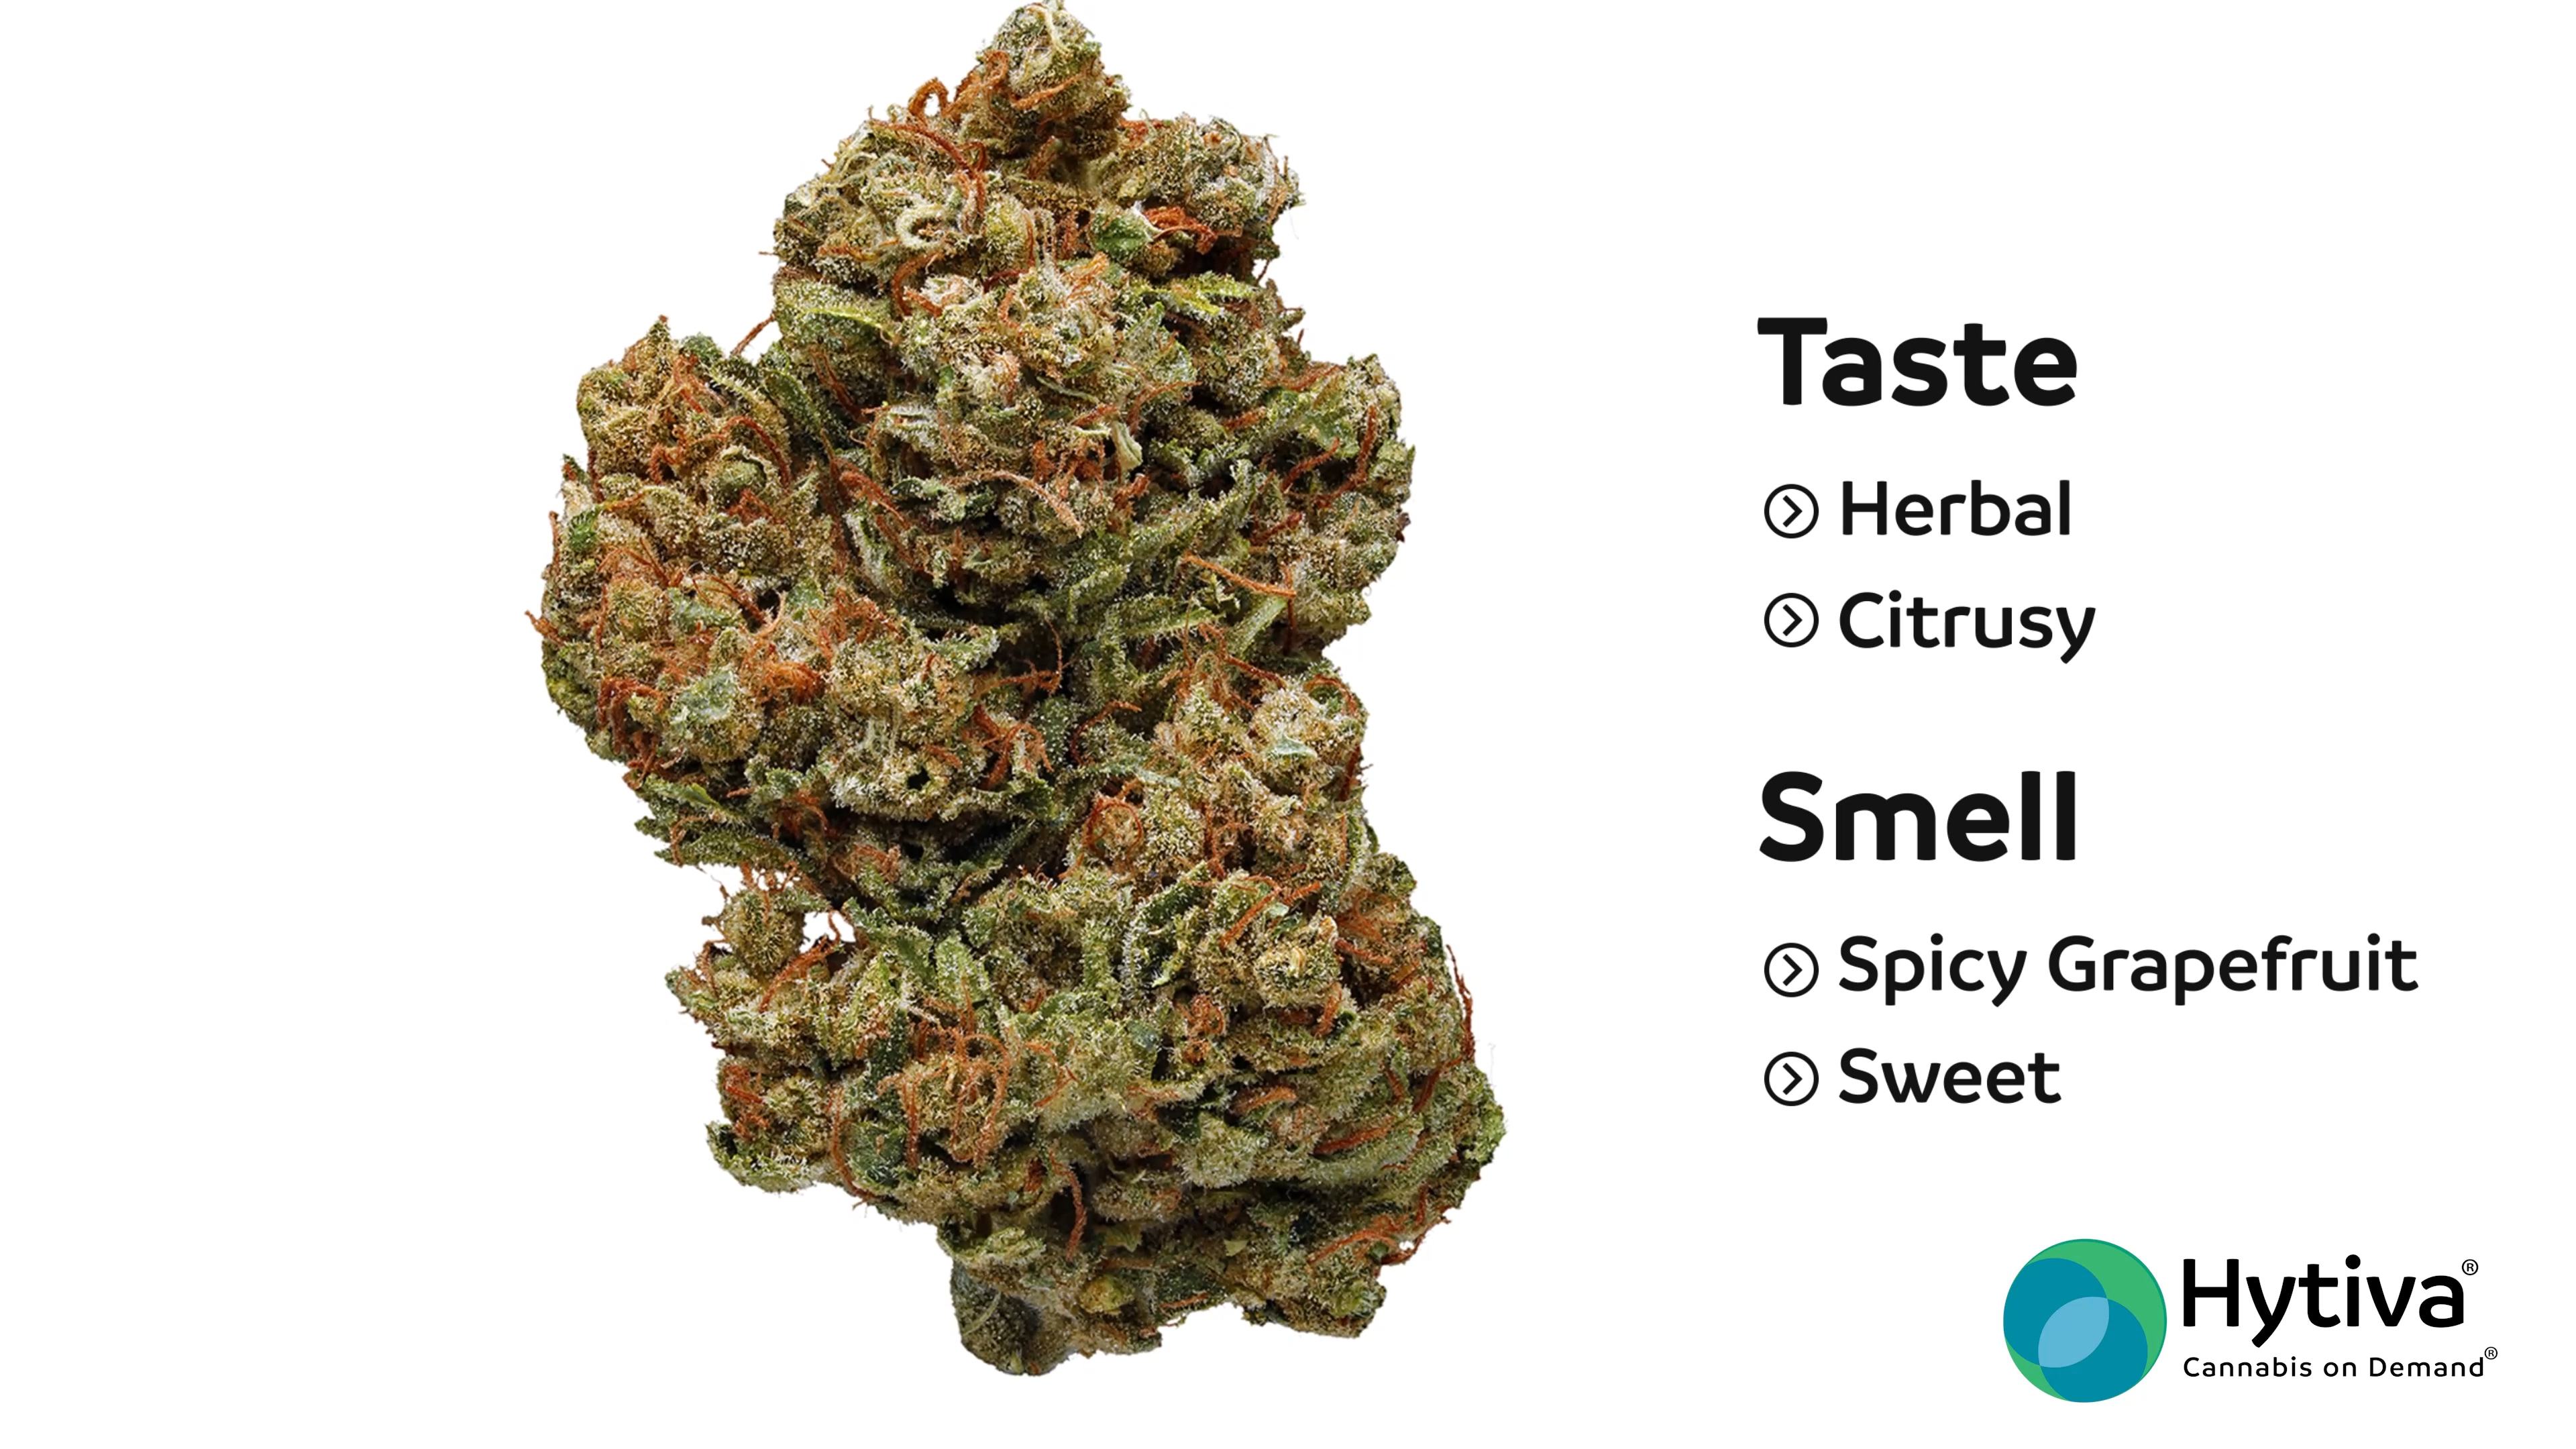 Sweet and Sour - Hybrid Strain